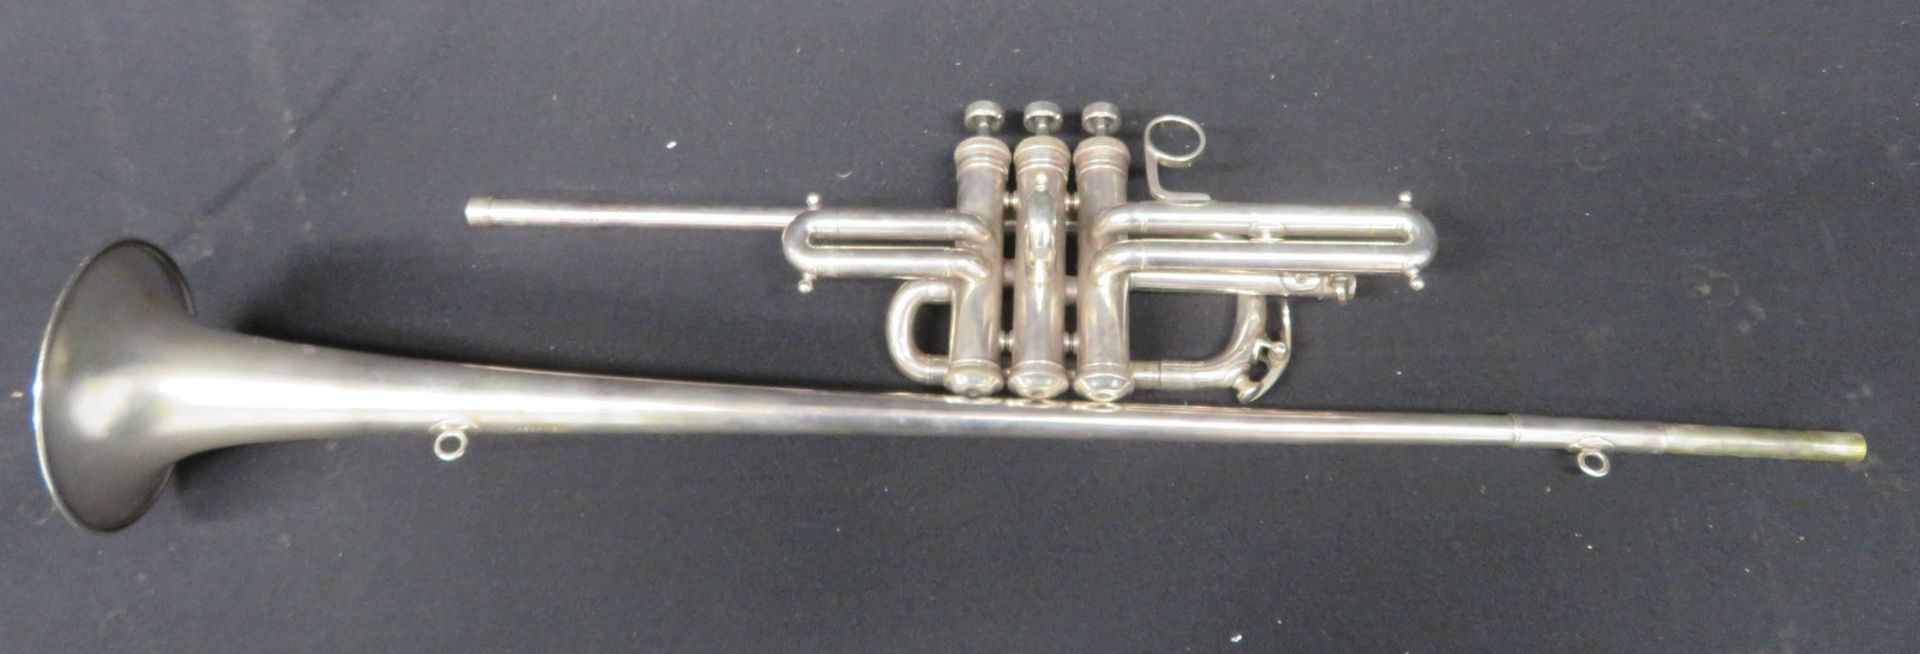 Boosey & Hawkes Imperial fanfare trumpet with case. Serial number: 514759. - Image 16 of 18